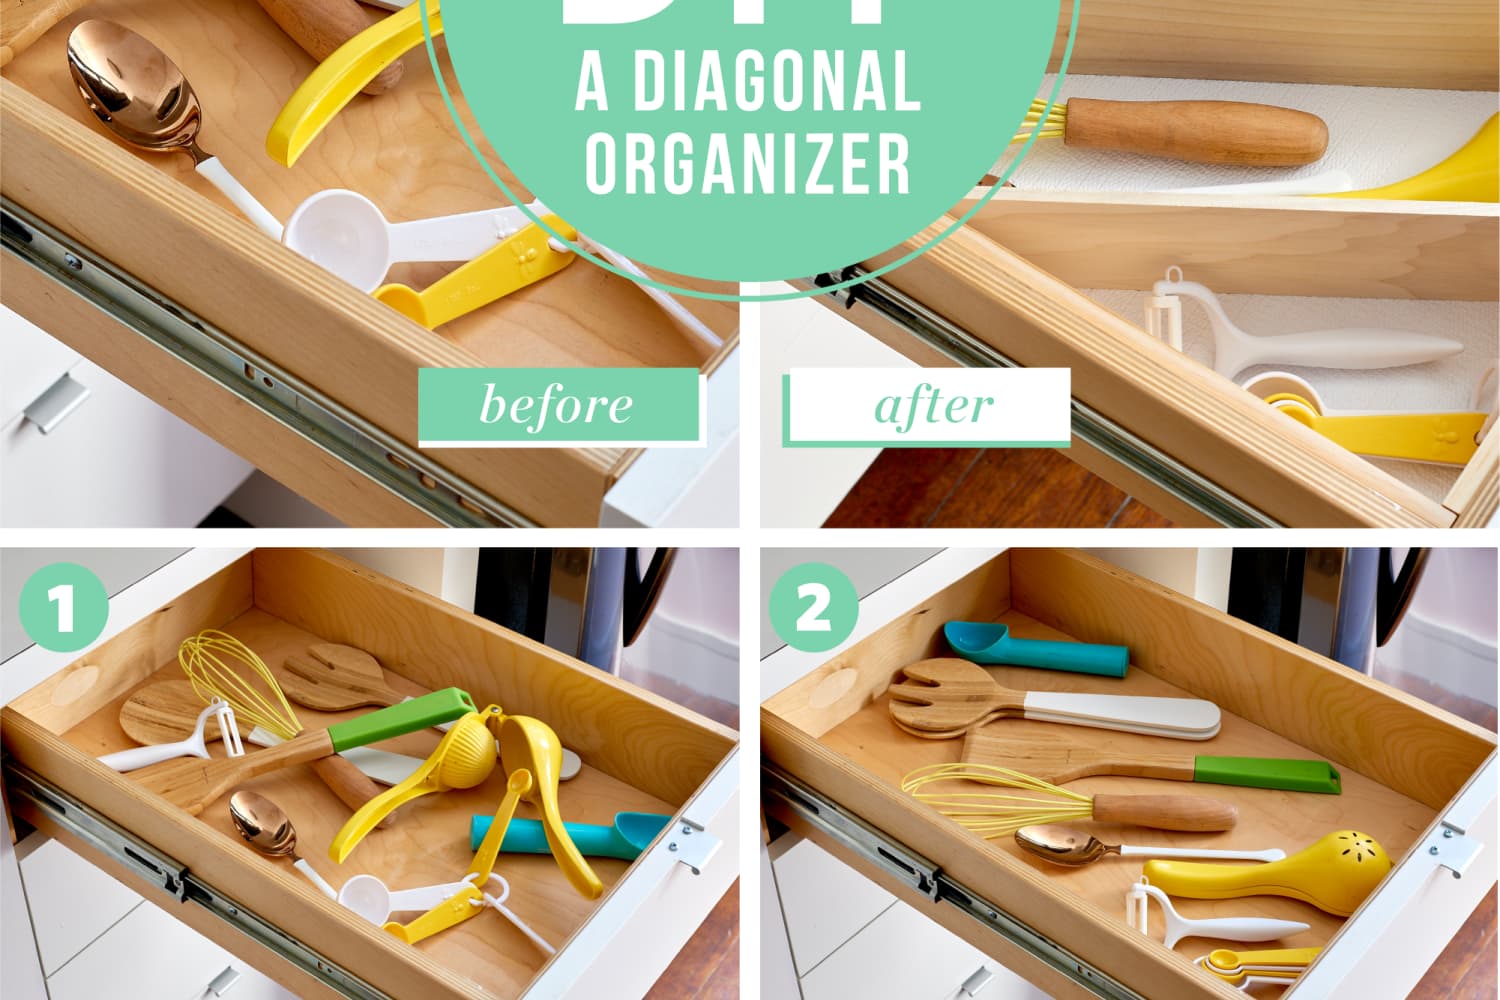 How To Build a Diagonal Drawer Organizer The Kitchn